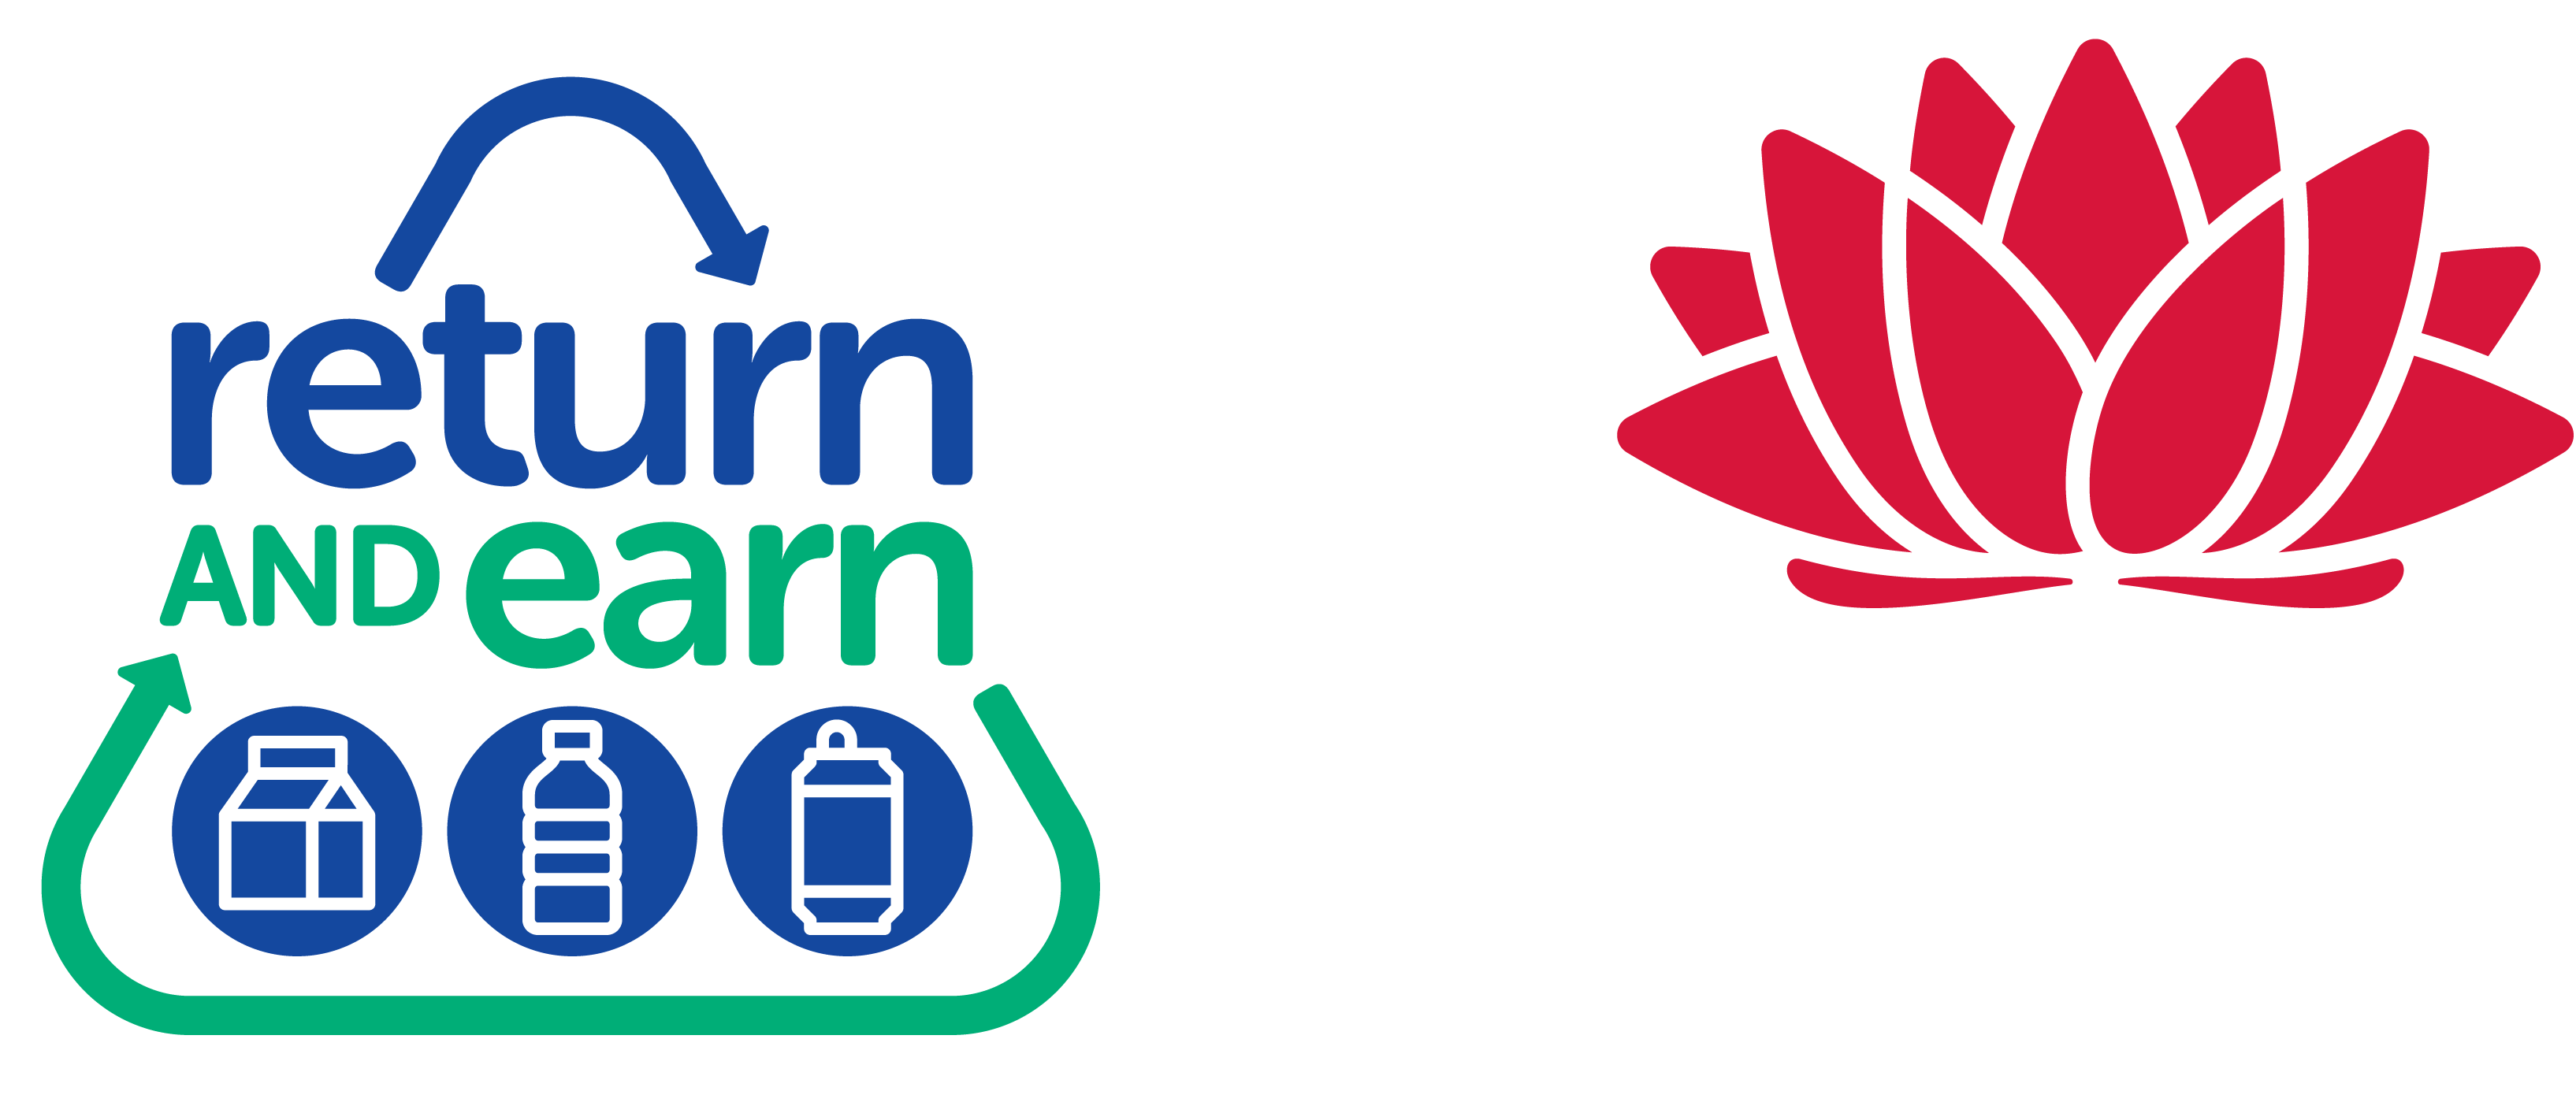 Home - Return and earn Logo and NSW Government logo